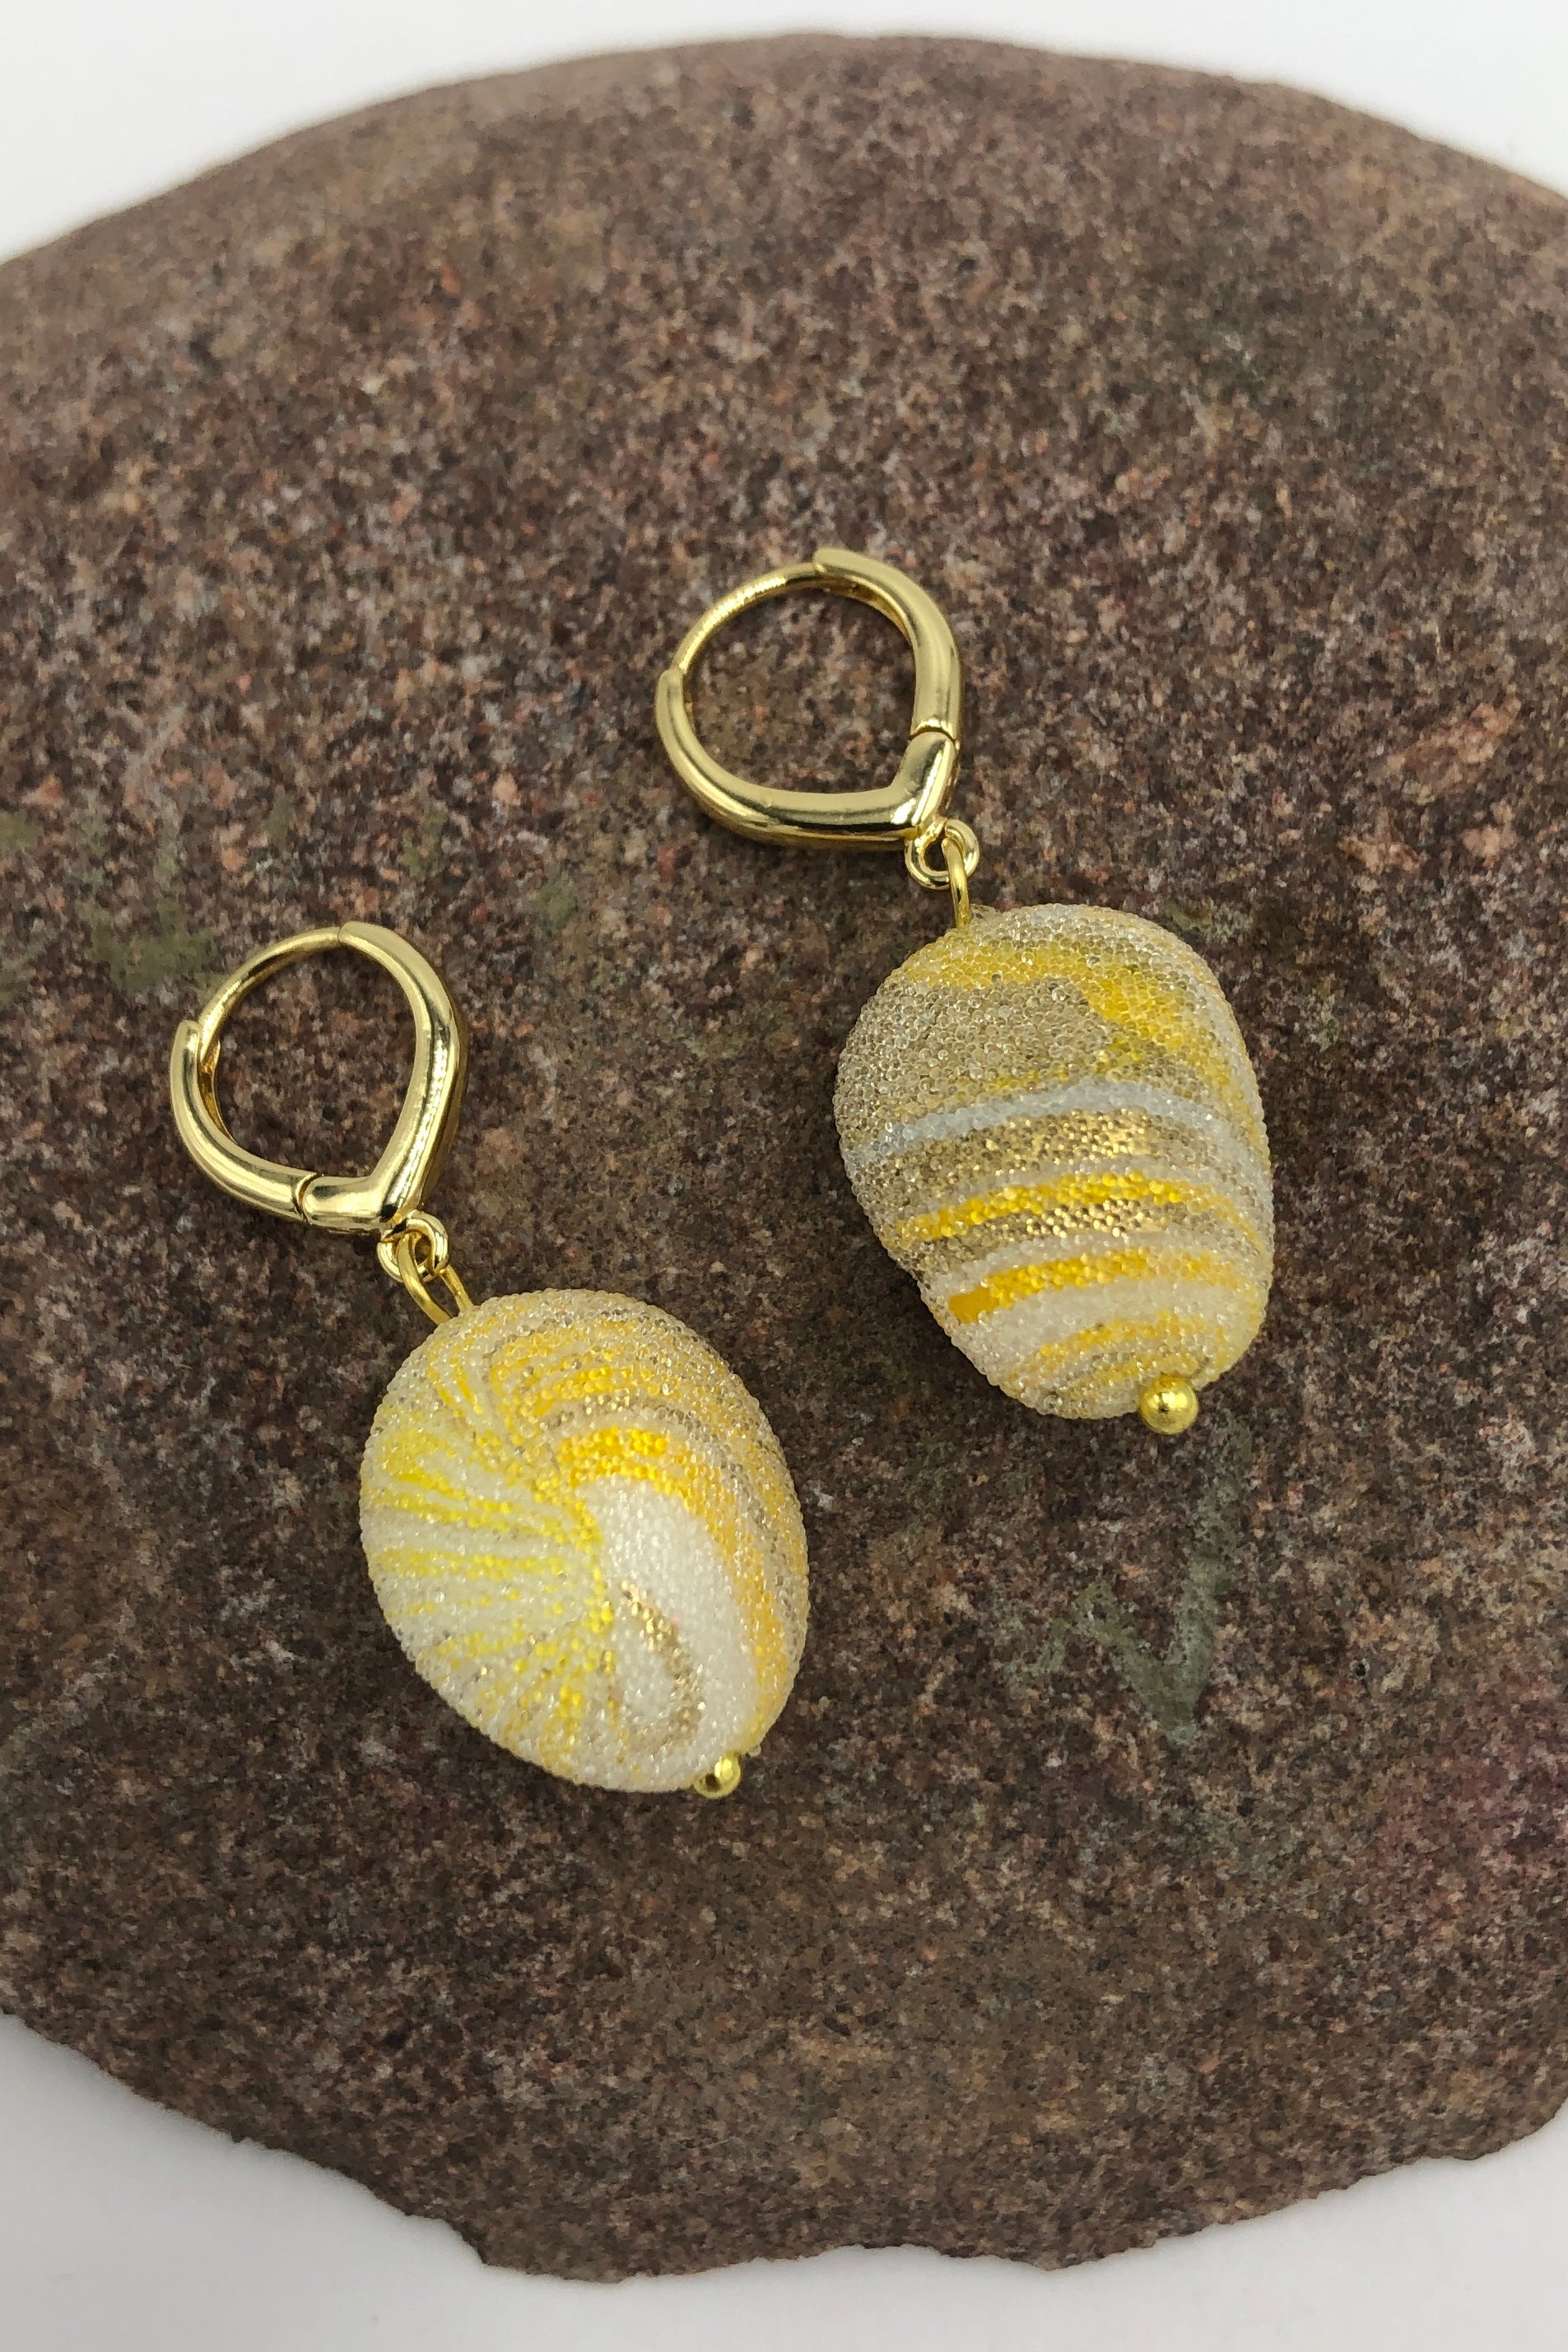 yellow and gold swirl earrings on a rock